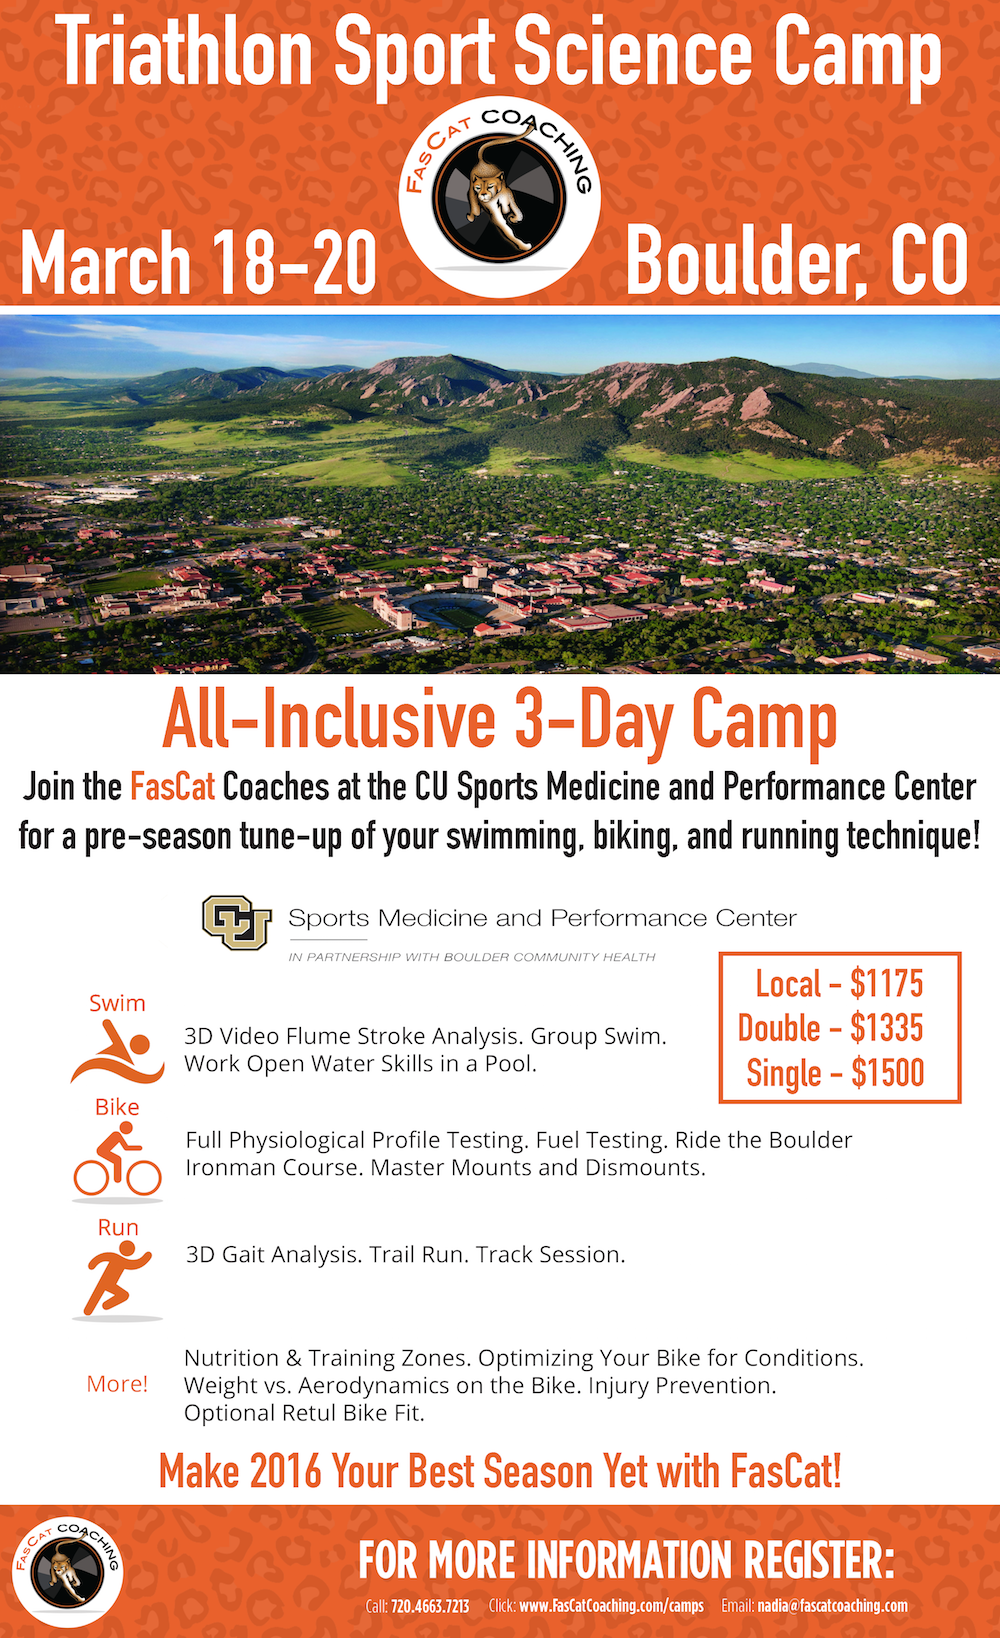 FasCat Coaching is hosting a Triathlon Sport Science Camp on March 18-20, 2016 in Boulder, Colorado for the athlete looking to succeed during the 2016 triathlon season.